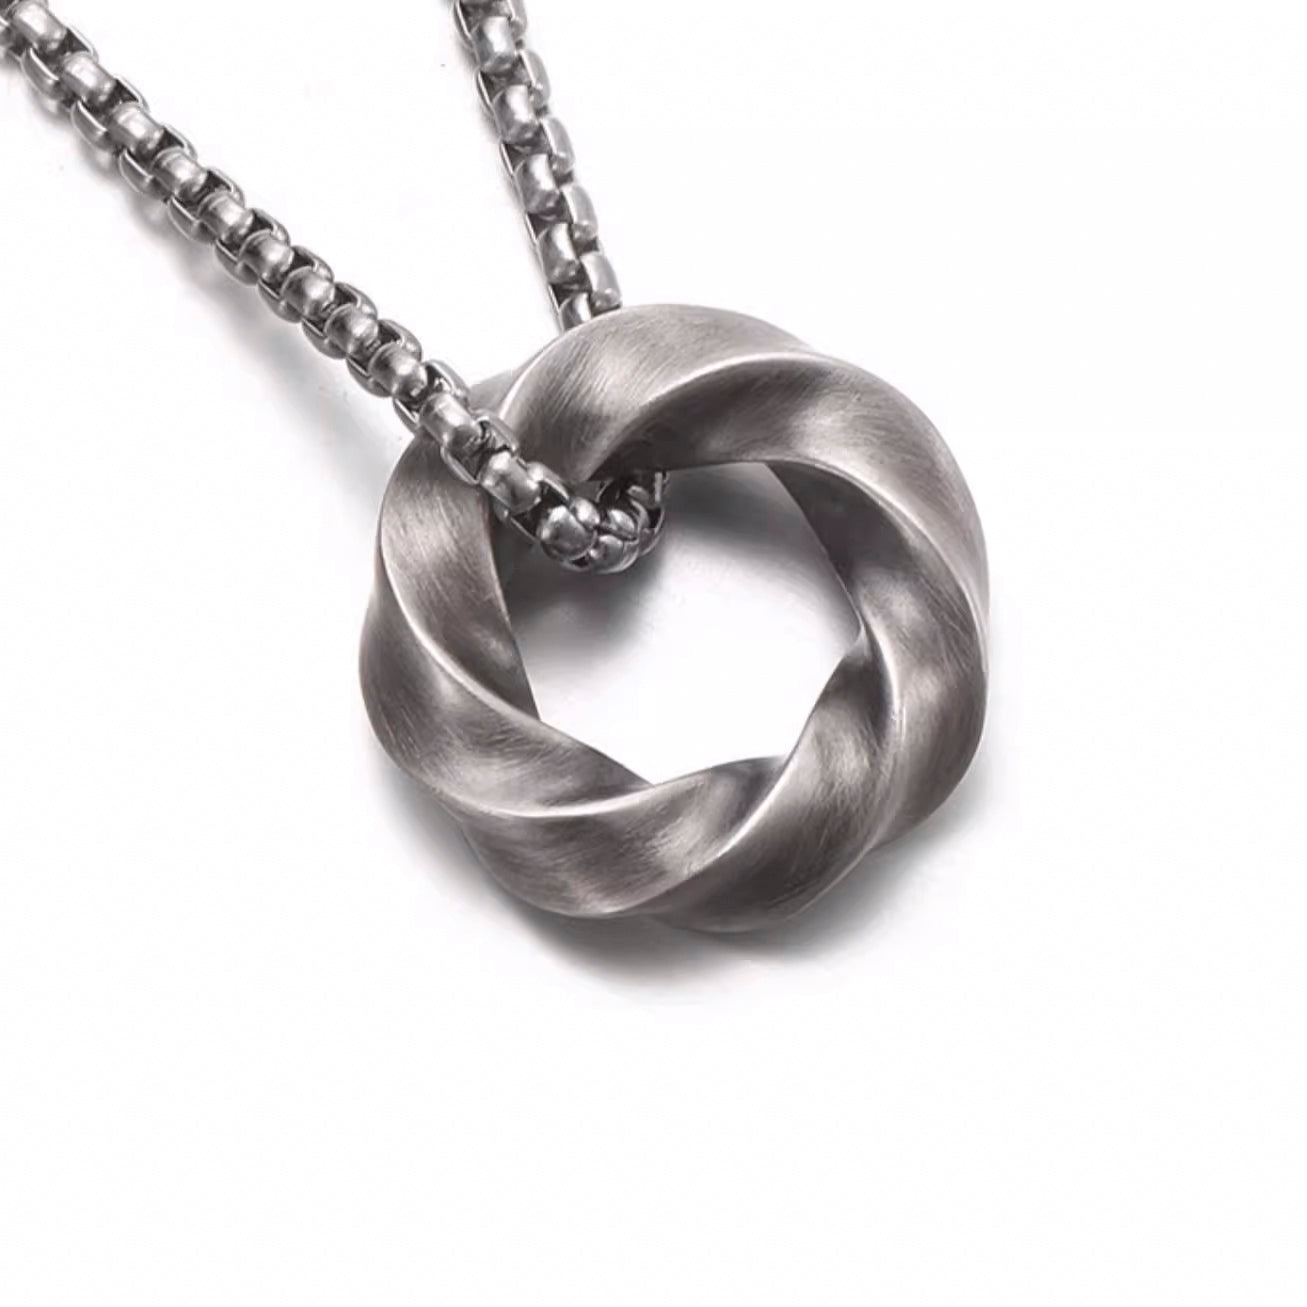 Möbius Twisted Ring Necklace Eco-friendly Cord